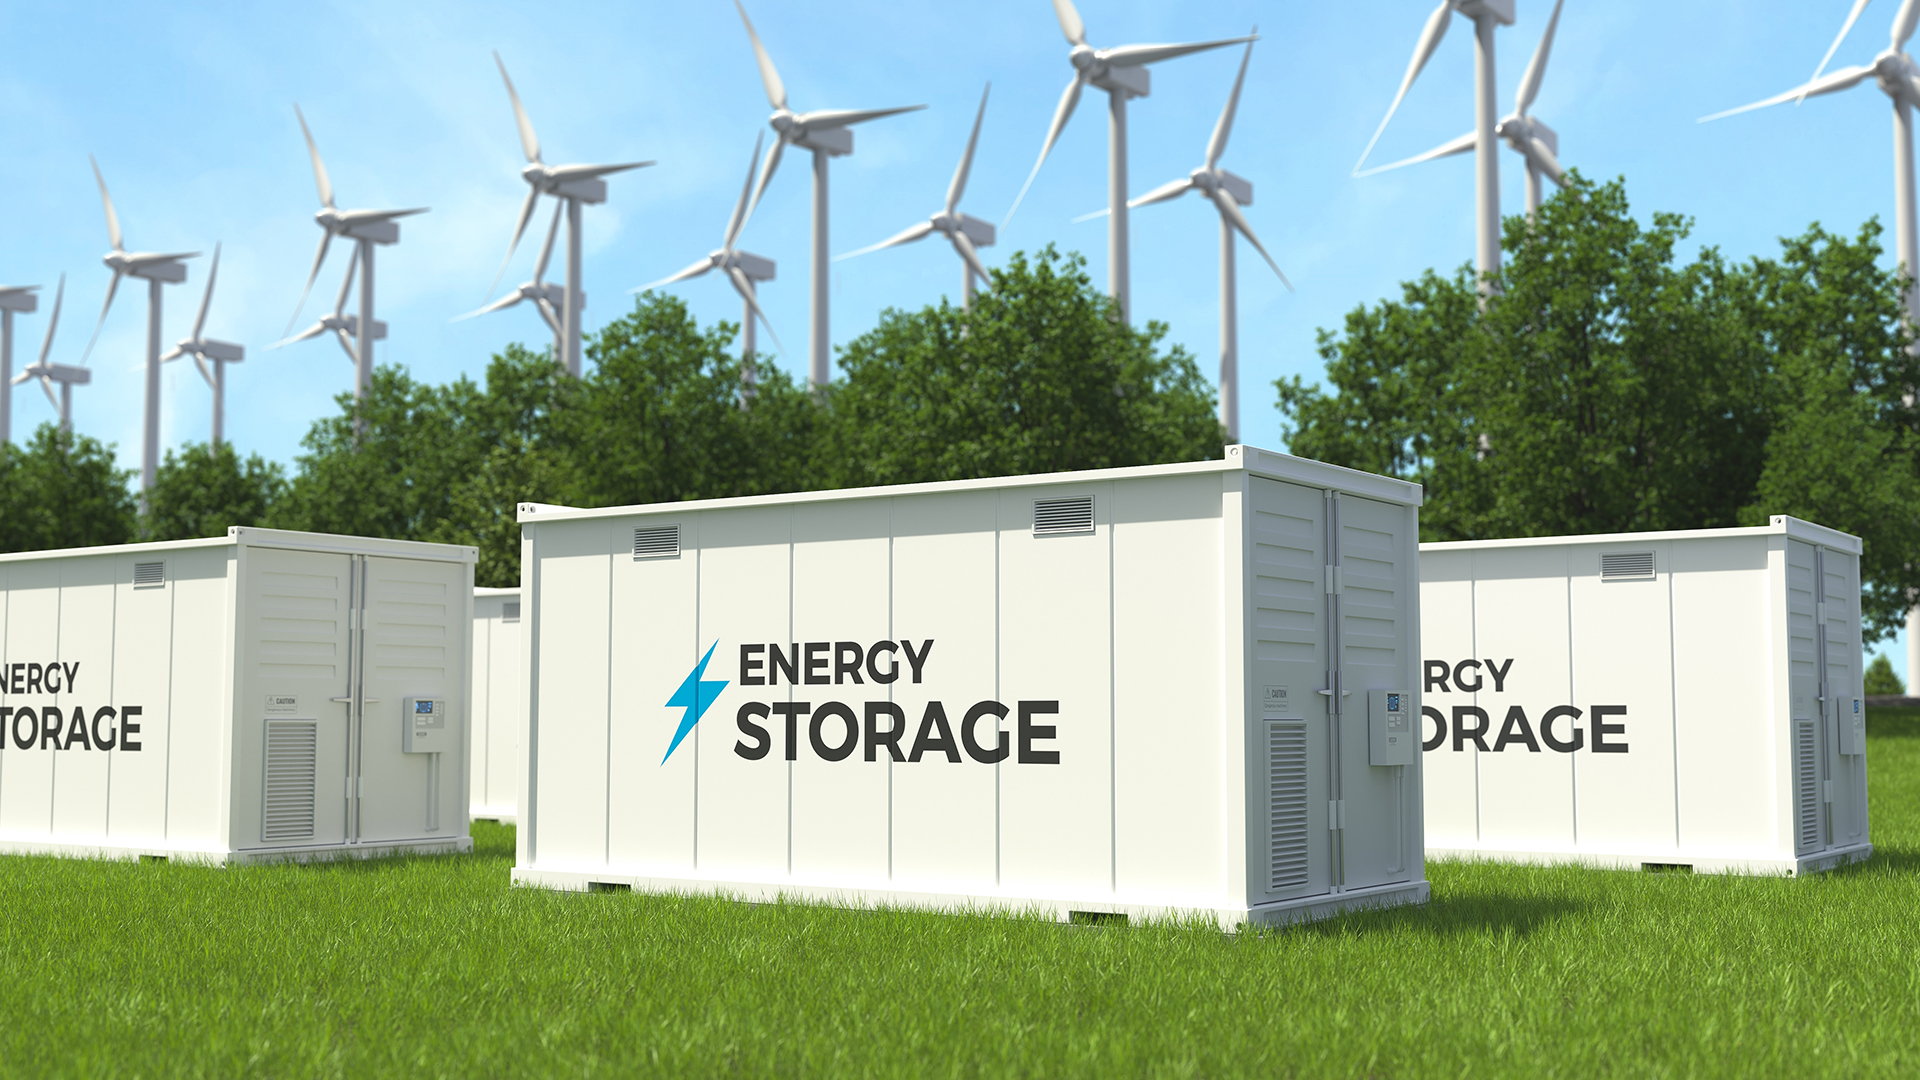 Iron-based flow batteries for renewable storage